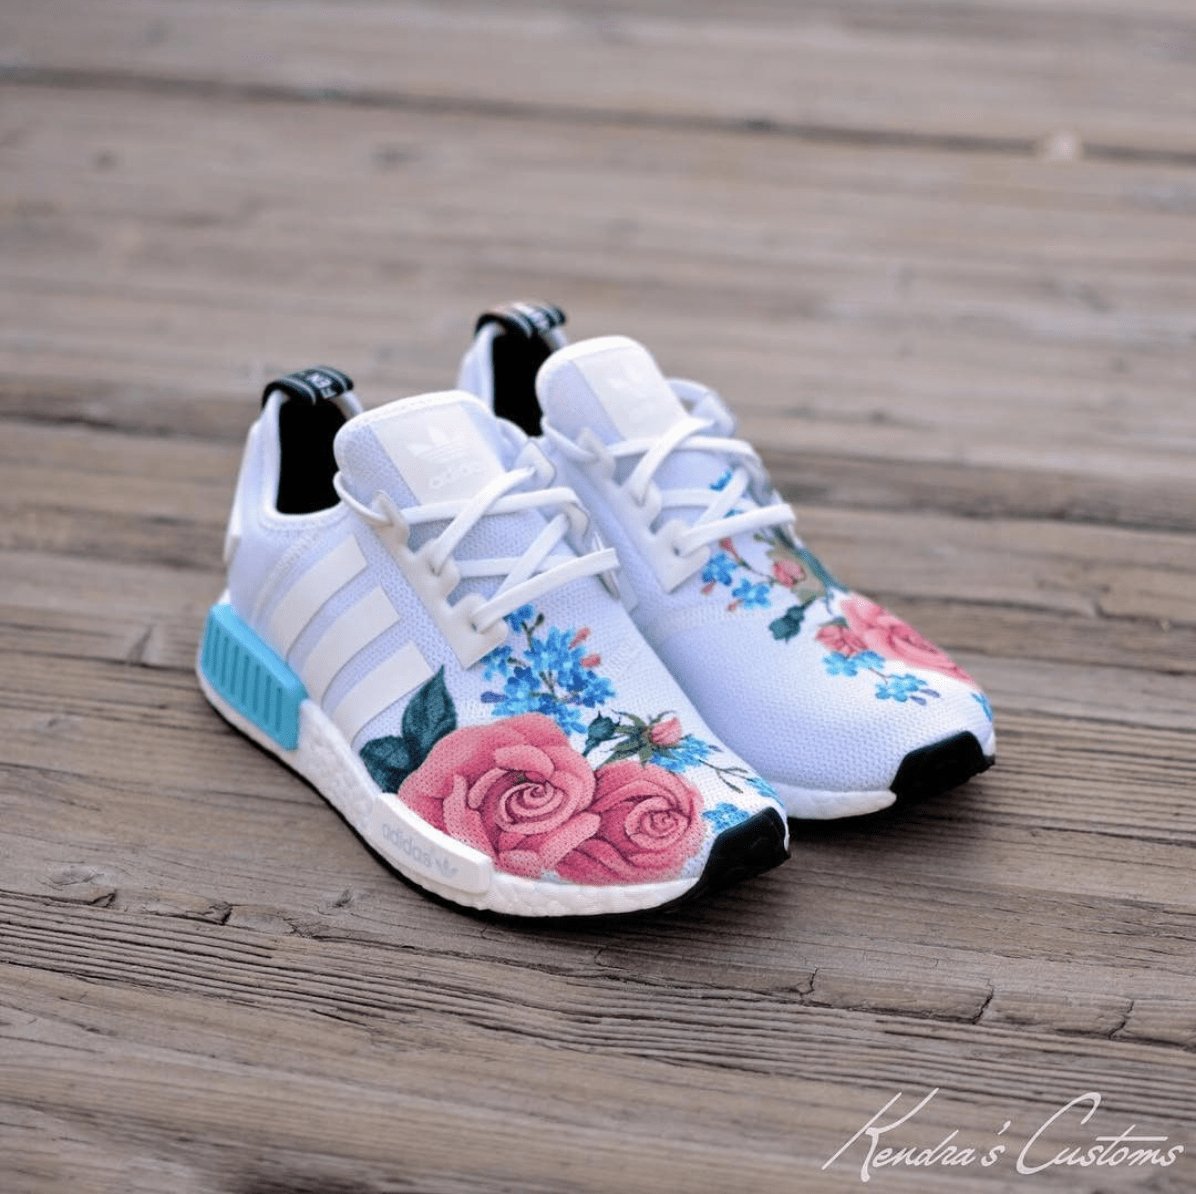 Some of the Best Customs from May - Angelus Direct